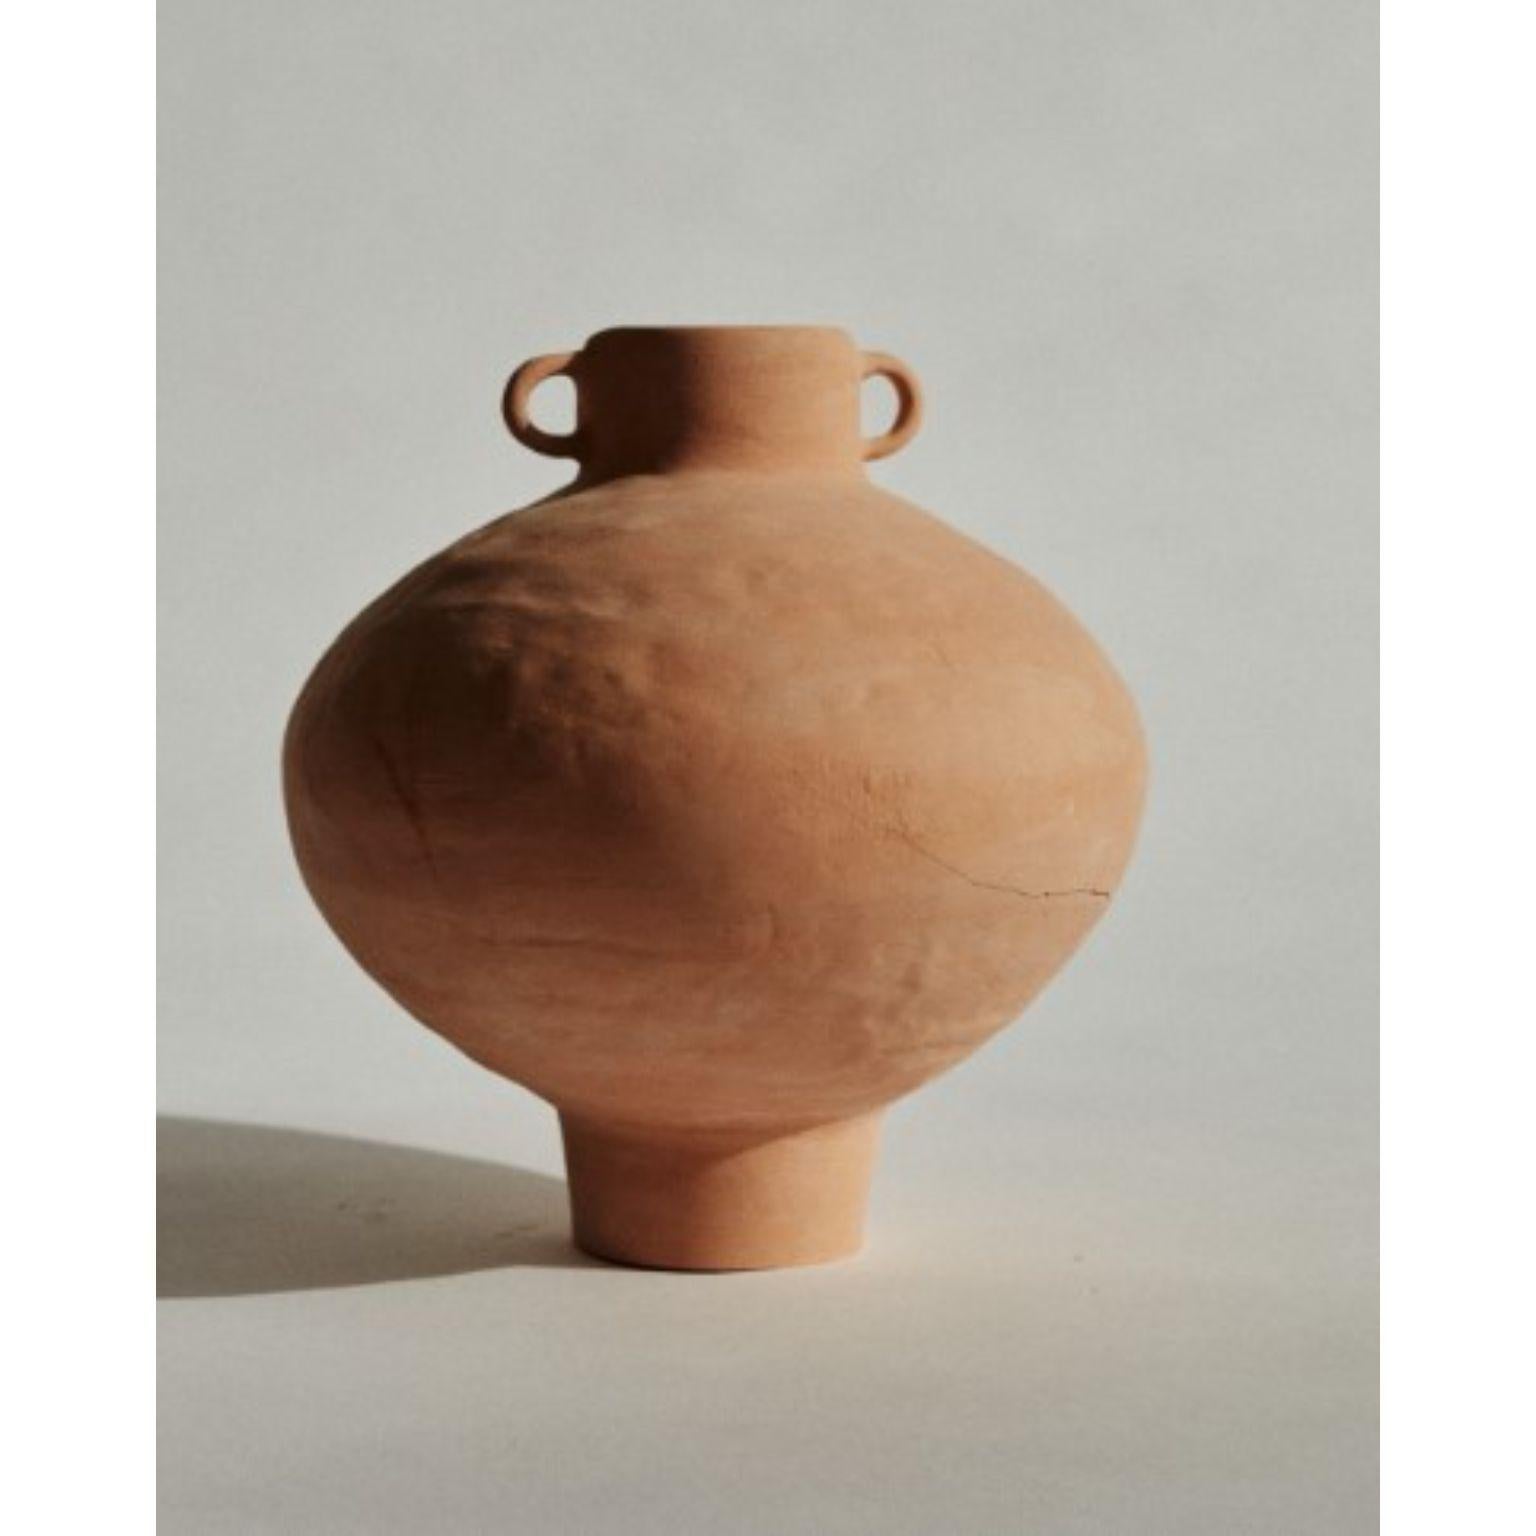 Small amphora in terracotta by Marta Bonilla
Dimensions: D20 x H25 cm
Materials: Terracotta, clay

Small amphora in terracotta: Low temperature hand modeled piece. Enameled inside. Outside it keeps the natural color of the clay, straw